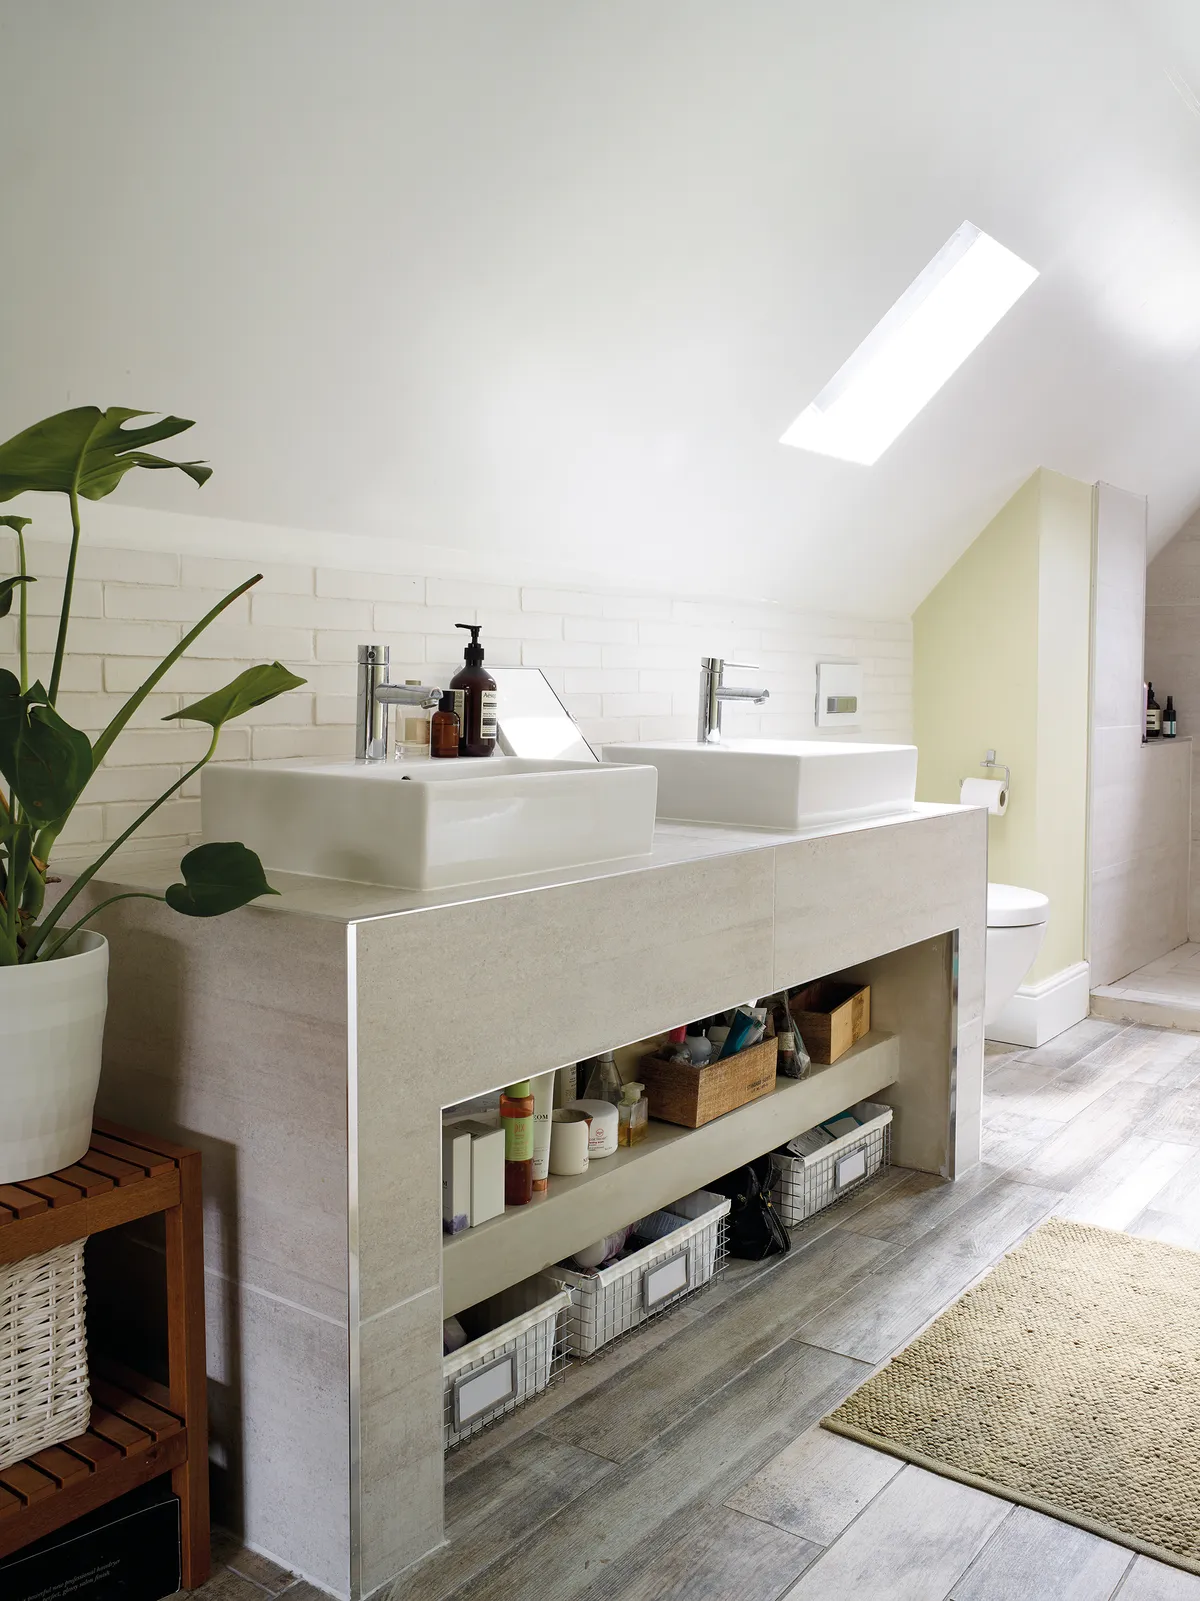 The Barcelona free-standing bath from Victoria   Albert Baths and the spacious walk-in shower screams luxury in the upstairs bathroom. Oak wood-effect tiles from Fired Earth and the Antheus wash basin by Villeroy & Boch finish off the luxe look